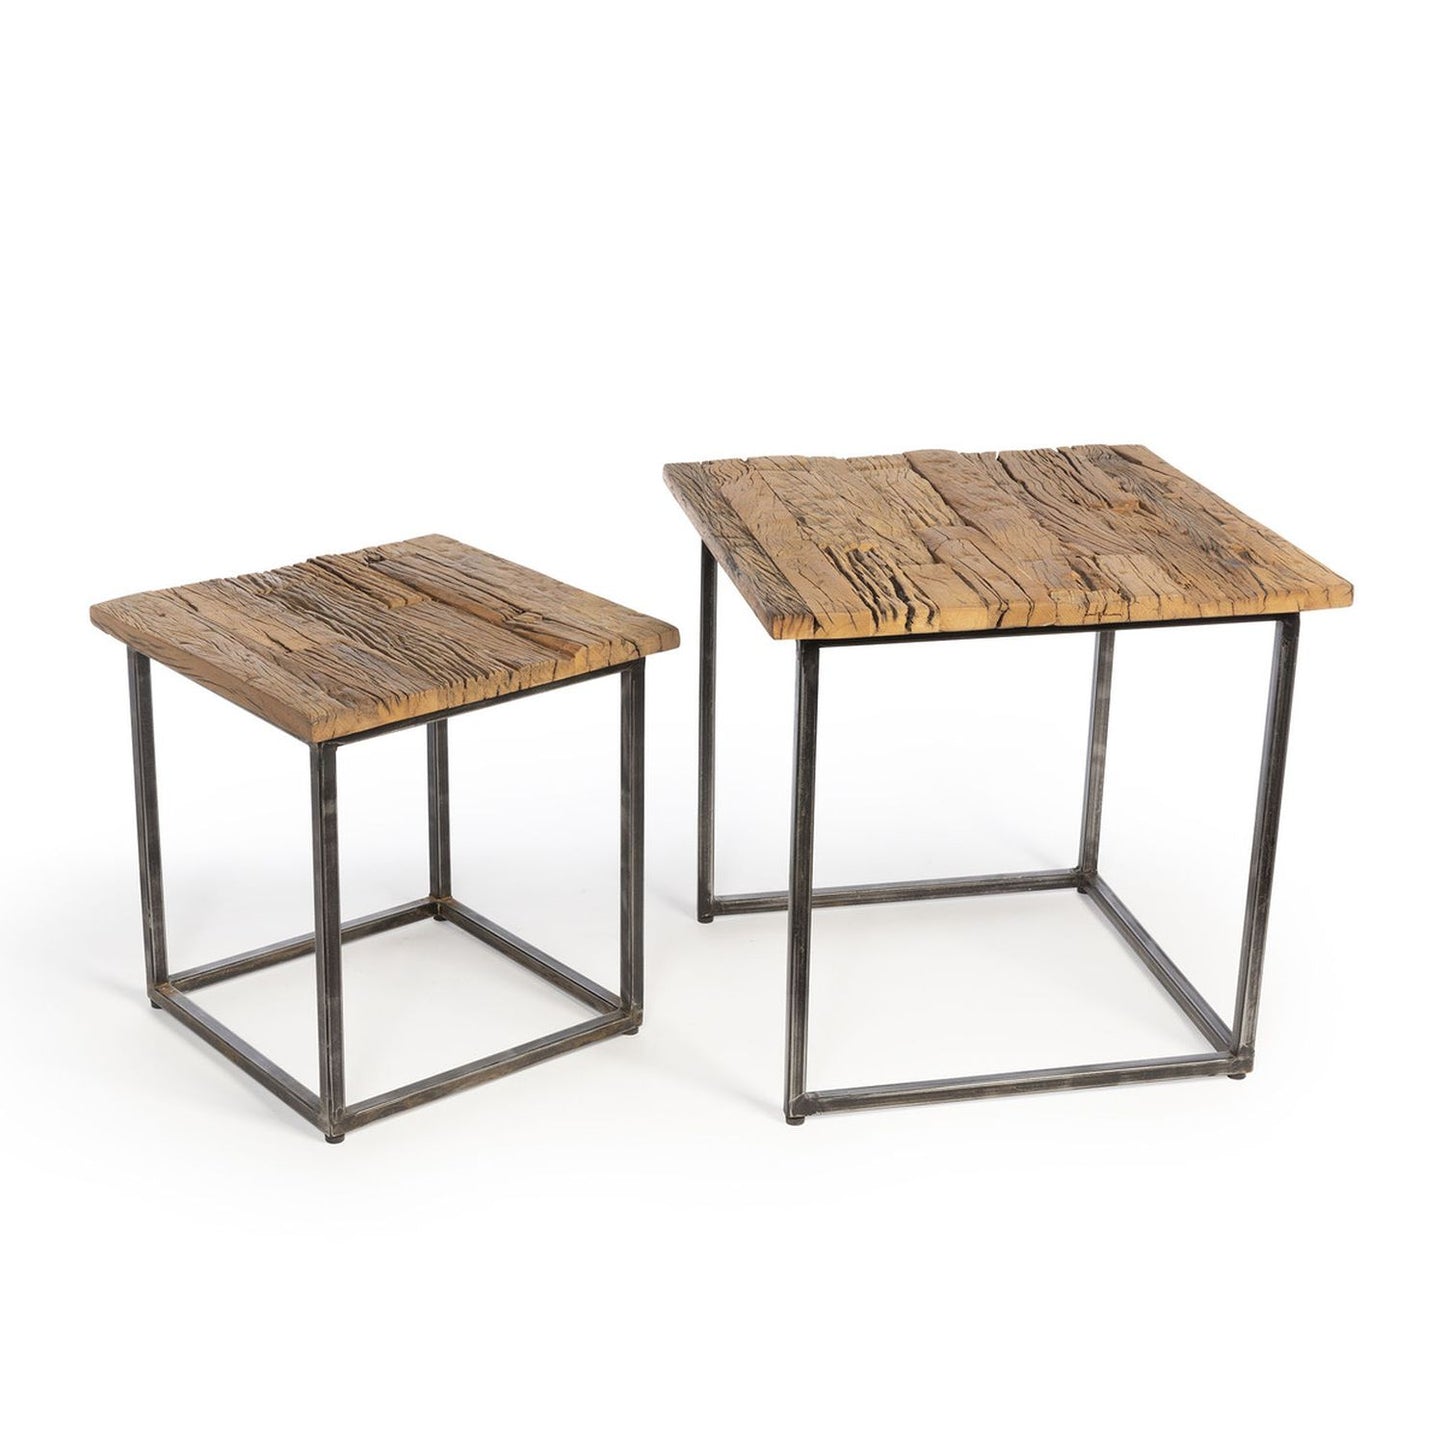 Park Hill Collection Railway Wood And Iron Nested Side Tables Set 2